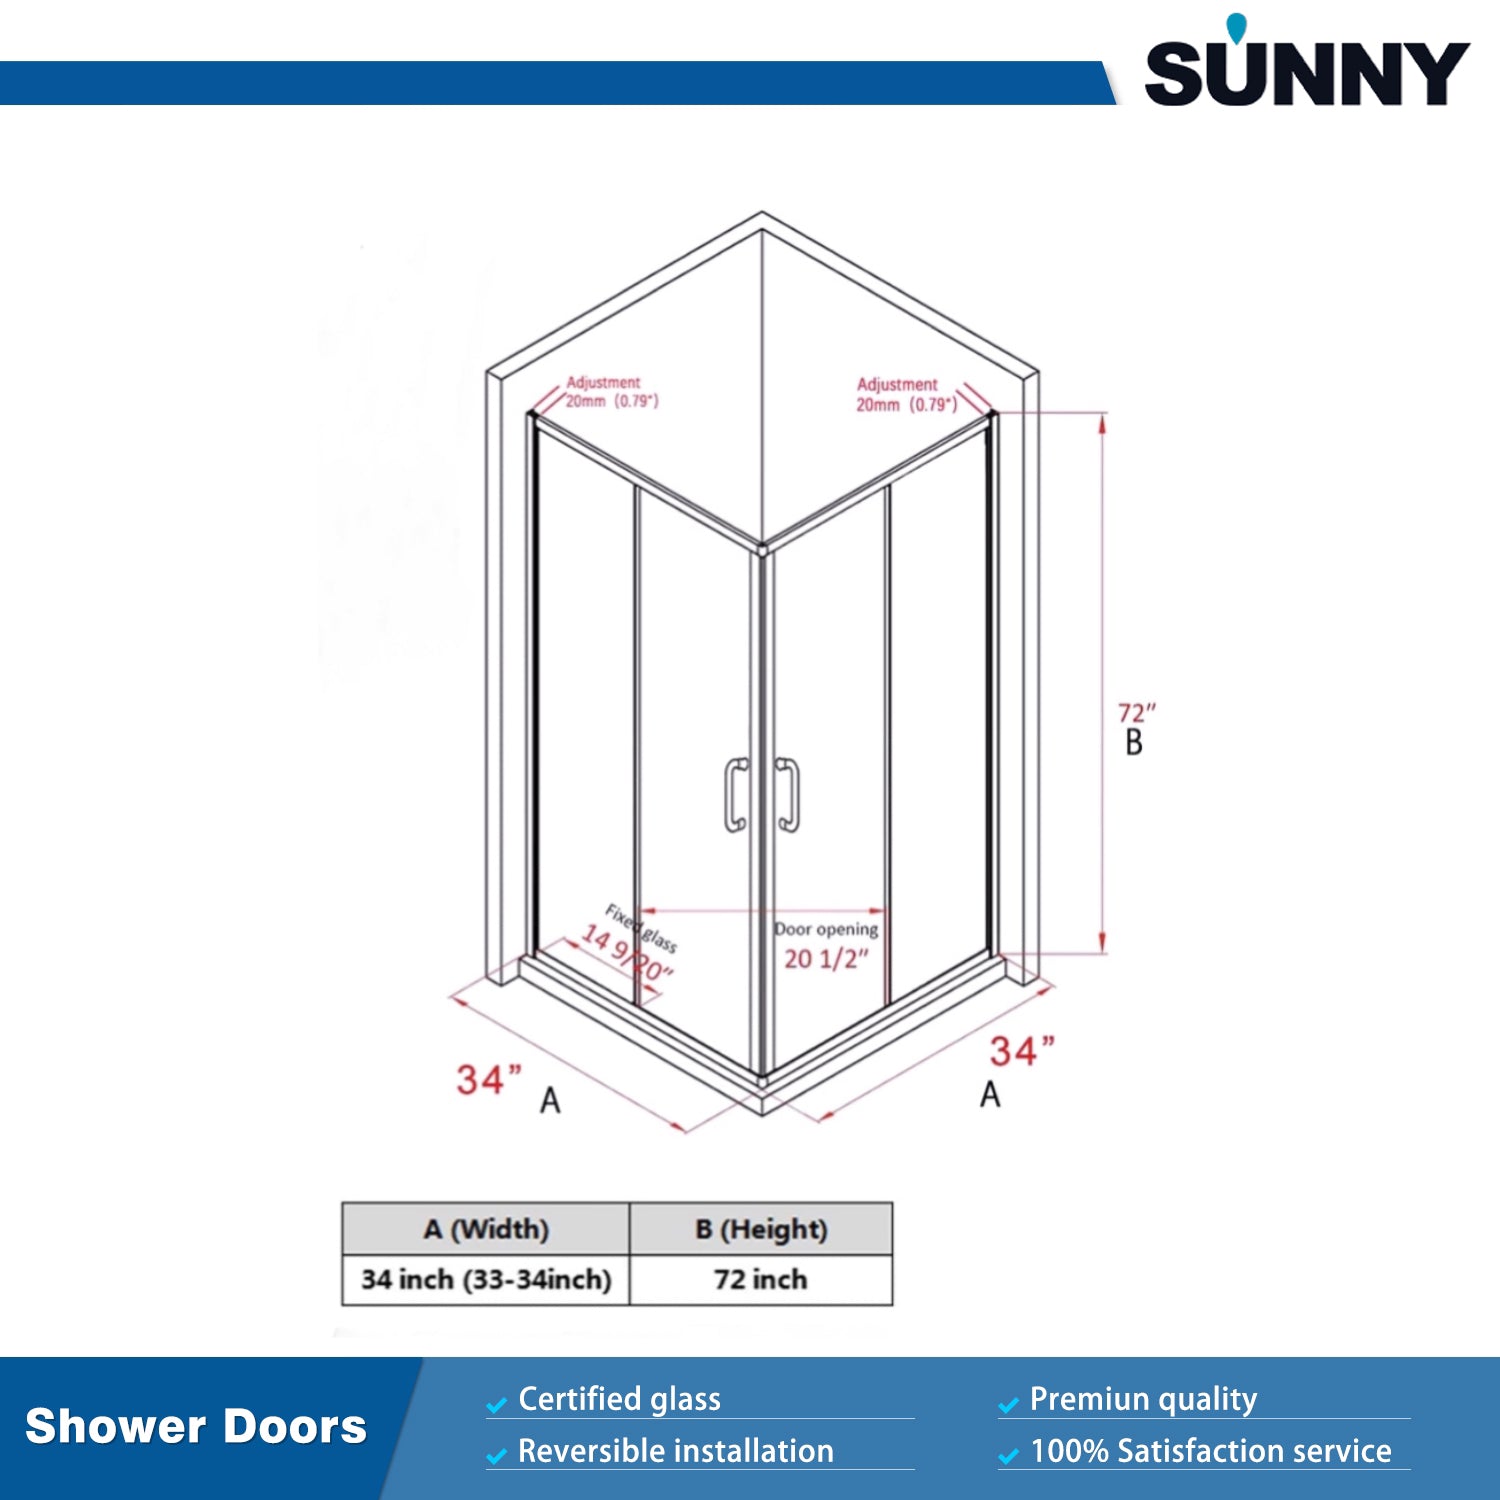 SUNNY SHOWER 34 in. L x 34 in. W x 72 in. H Black Finish Corner Entry Enclosure With Sliding Doors Size Chart